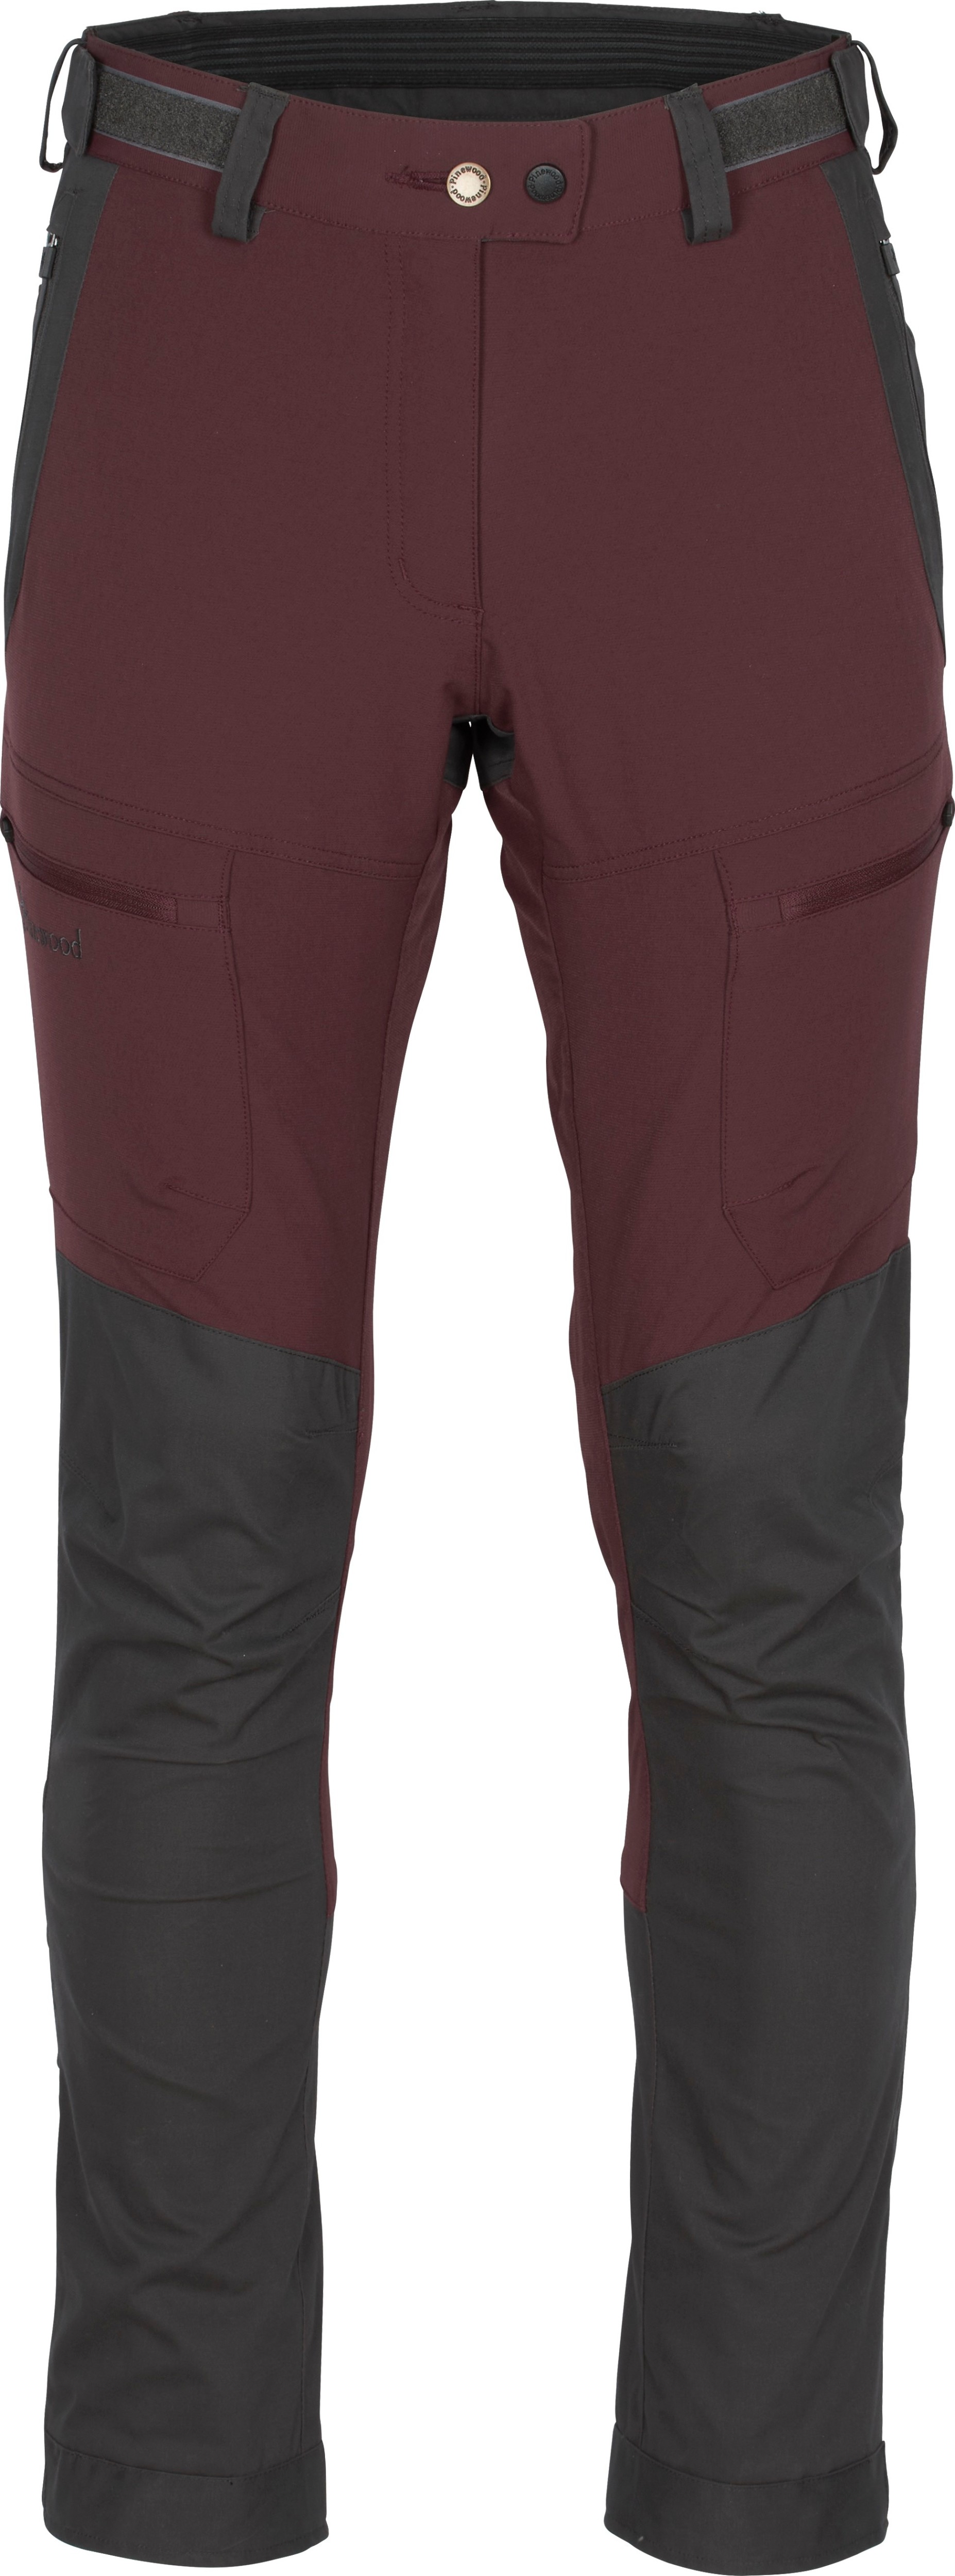 Women’s Finnveden Hybrid Extreme Trousers Earthplum/D.Anthraci